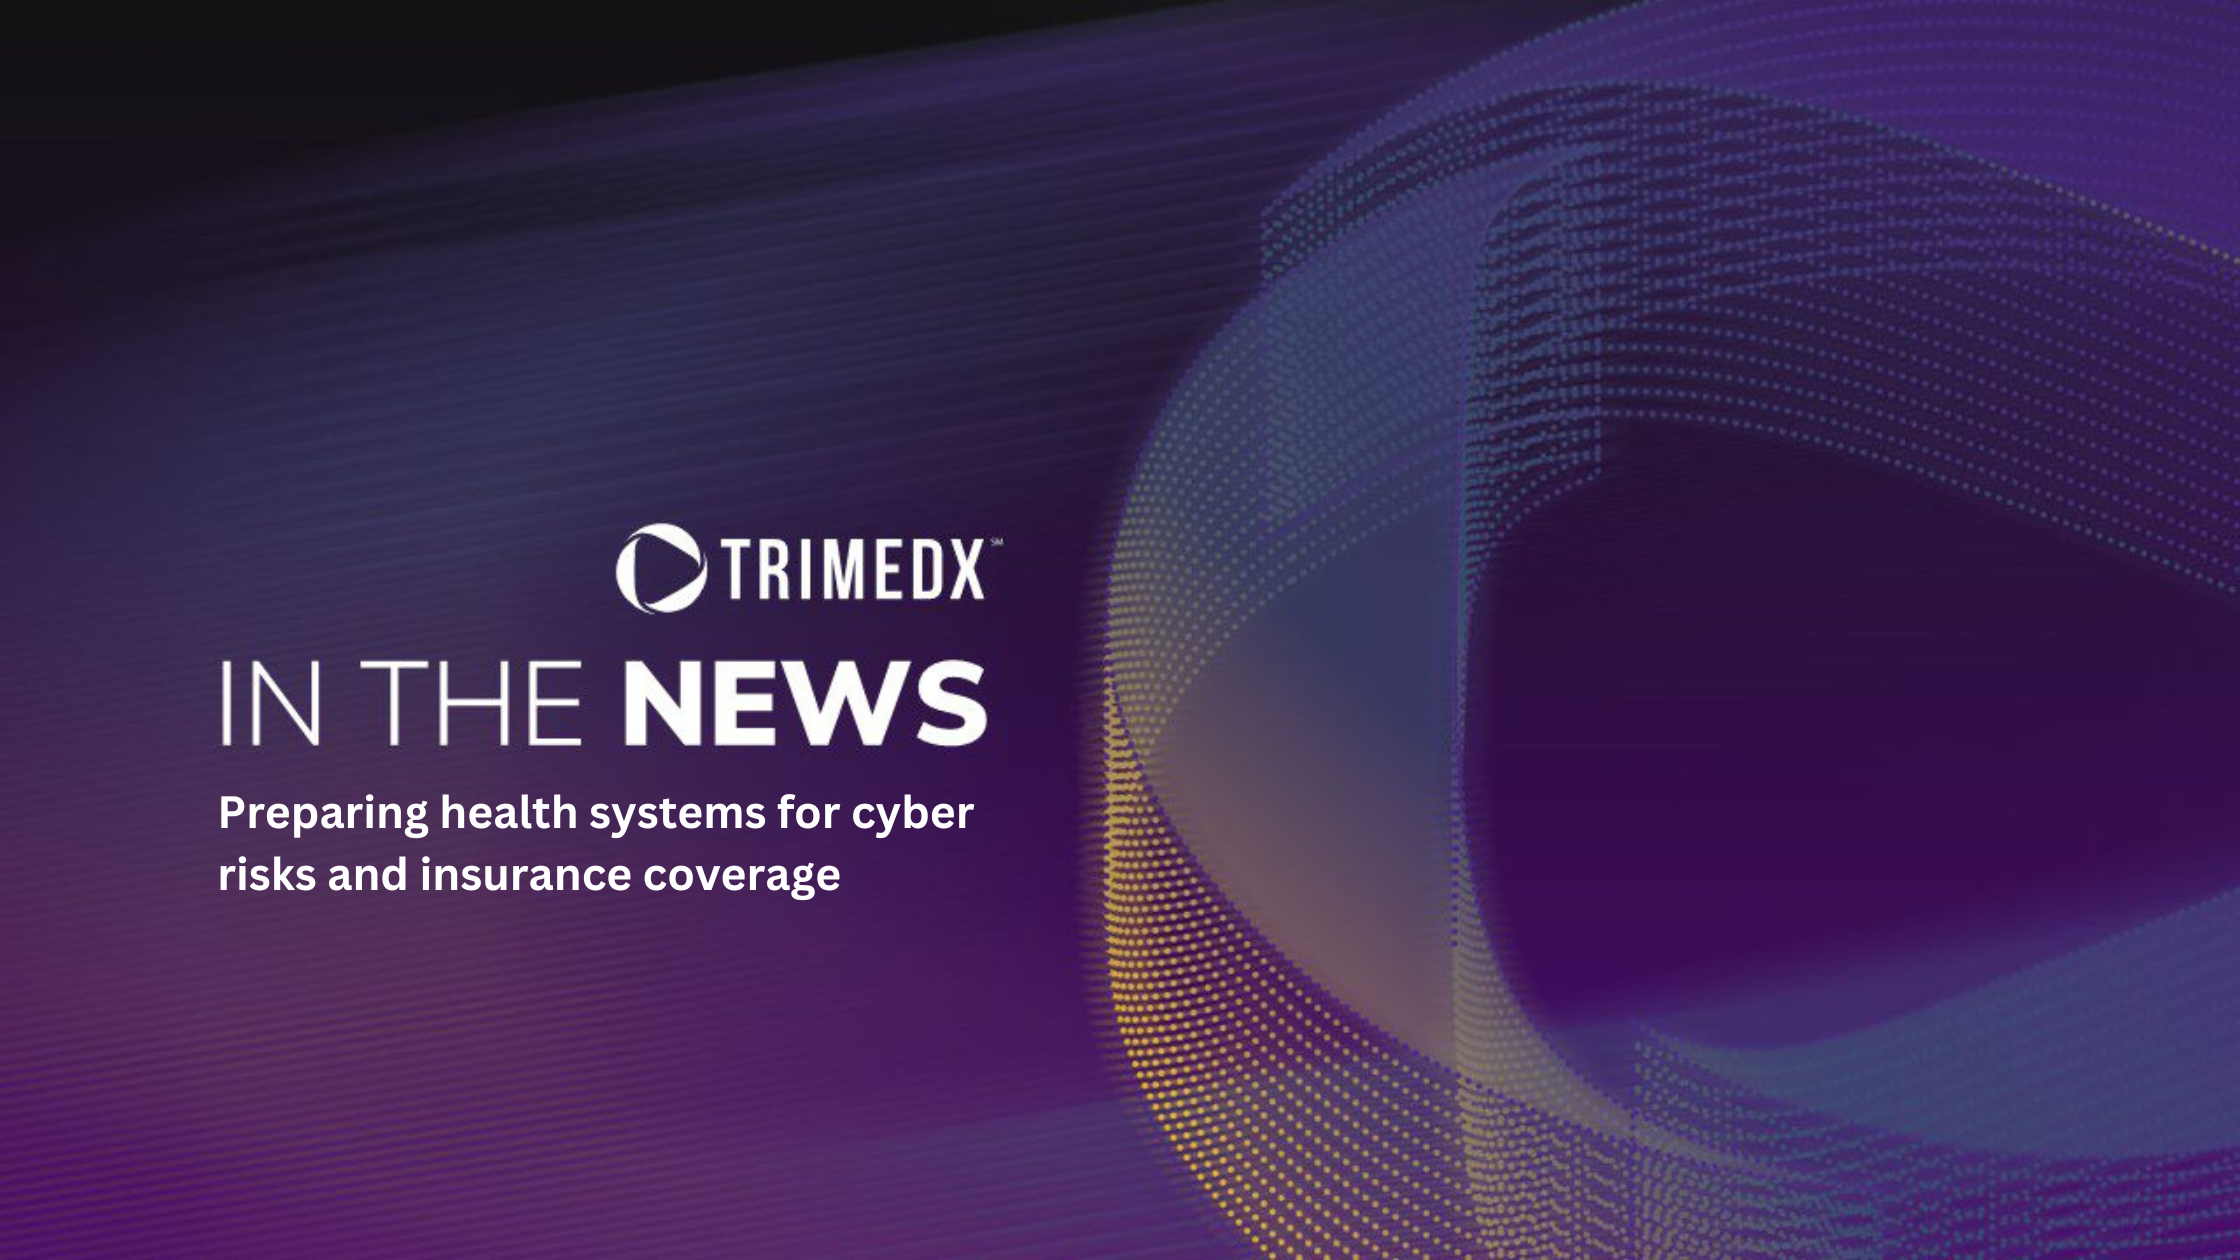  Preparing health systems for cyber risks and insurance coverage (In the News, TRIMEDX Logo on purple background)